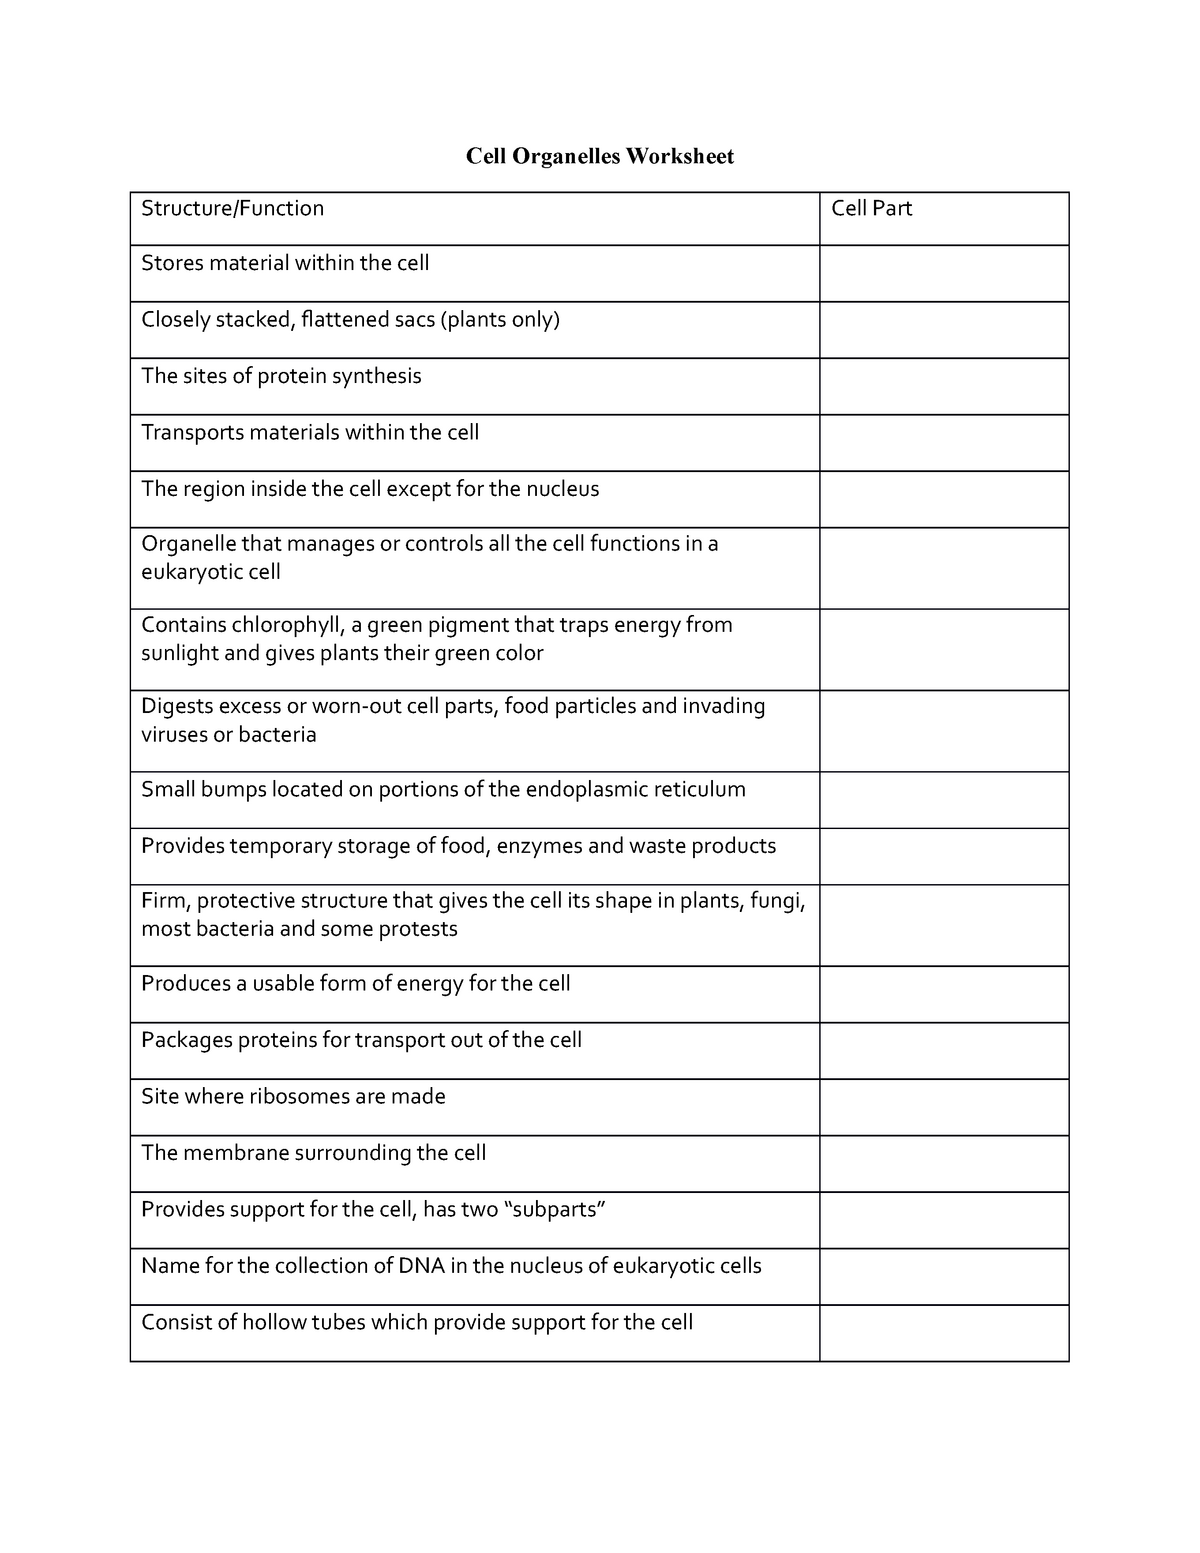 Cell Organelles Worksheet - Cell Organelles Worksheet Structure Pertaining To Cell Organelles Worksheet Answer Key